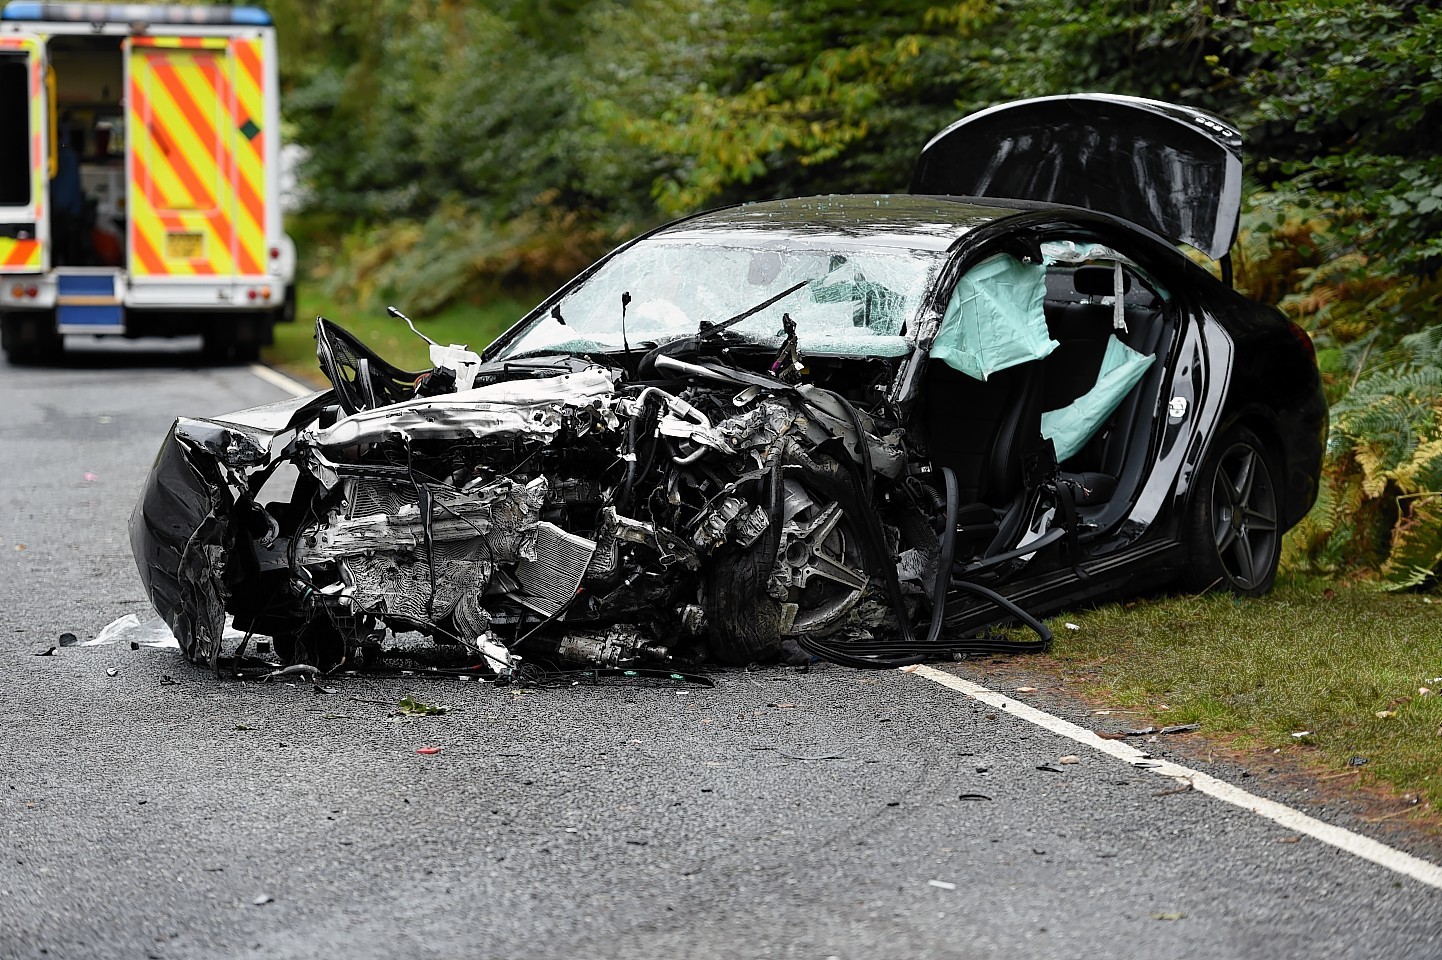 Mercedes involved in a single vehicle accident on the A939 on the outskirts of Grantown on Spey